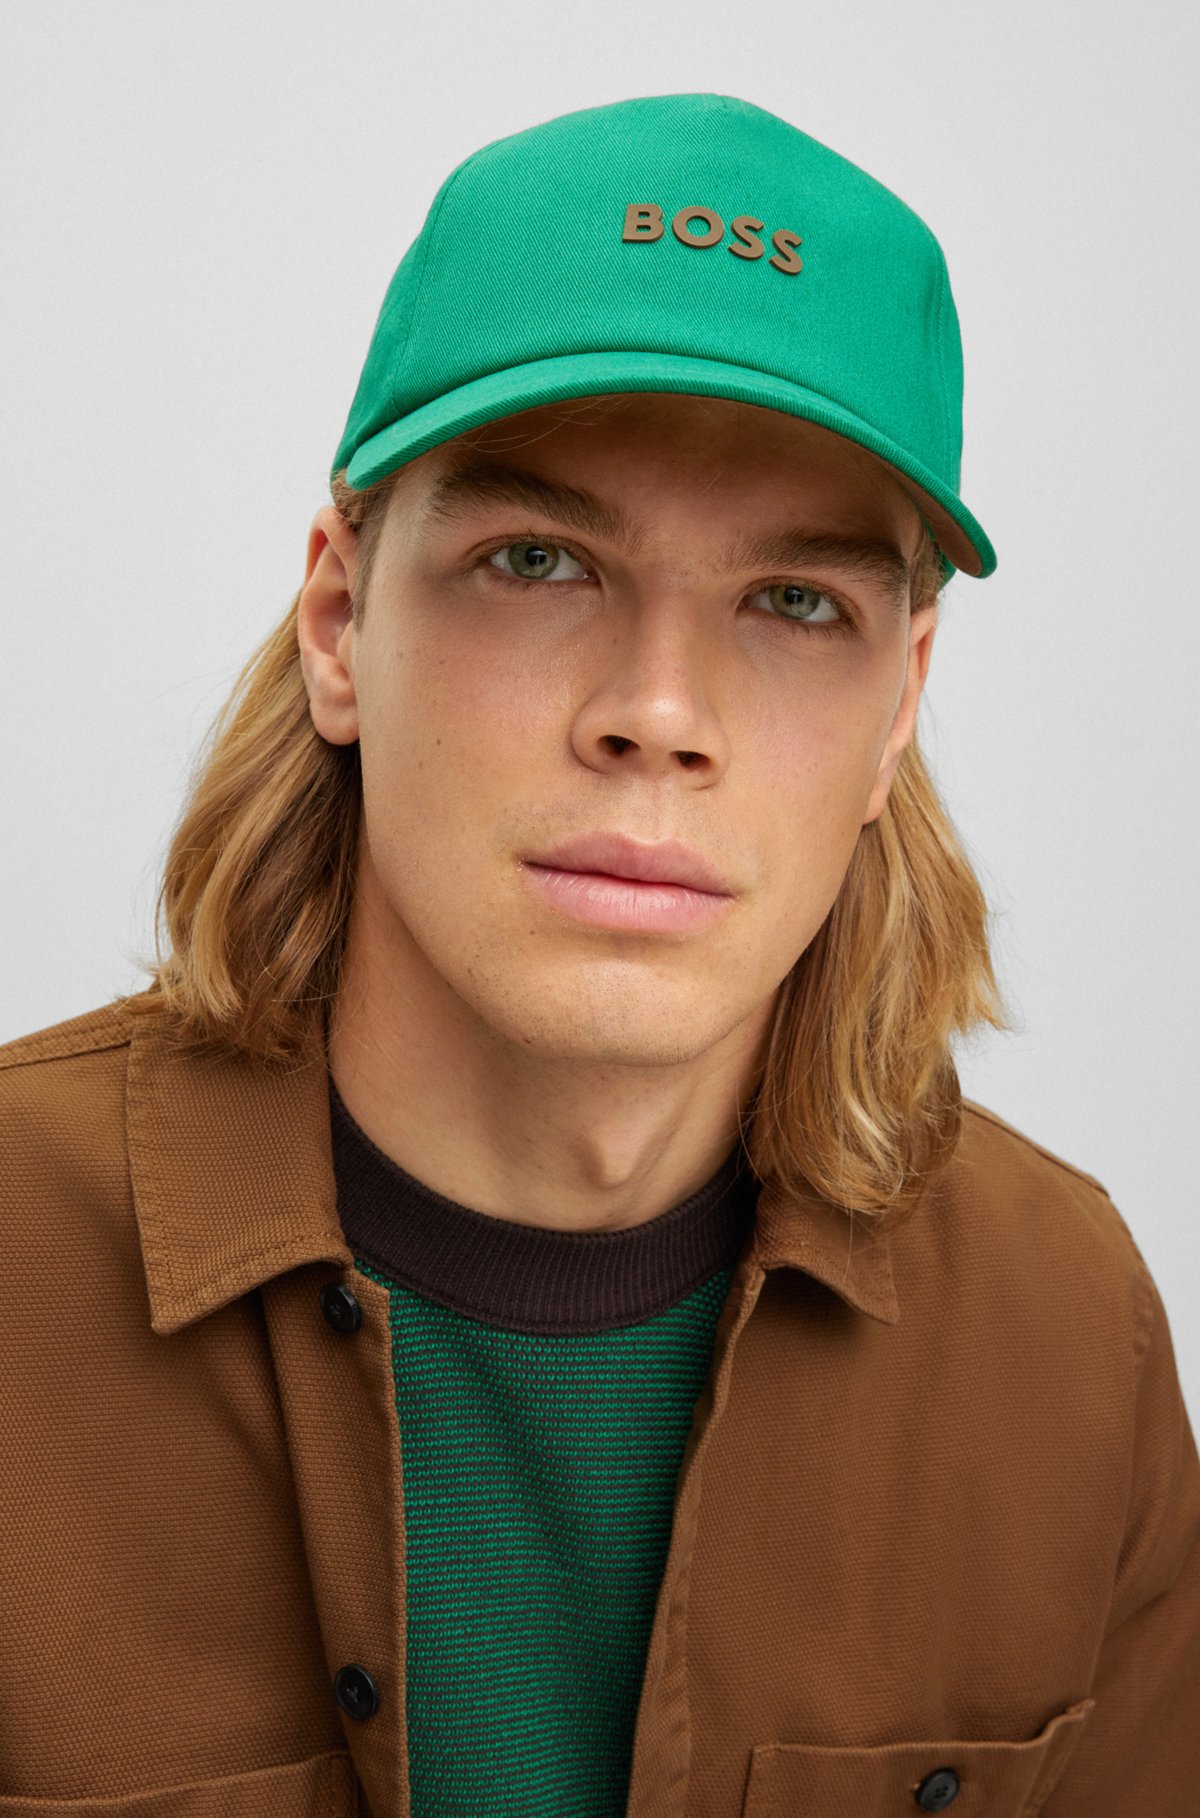 Cotton-twill cap with logo, Green